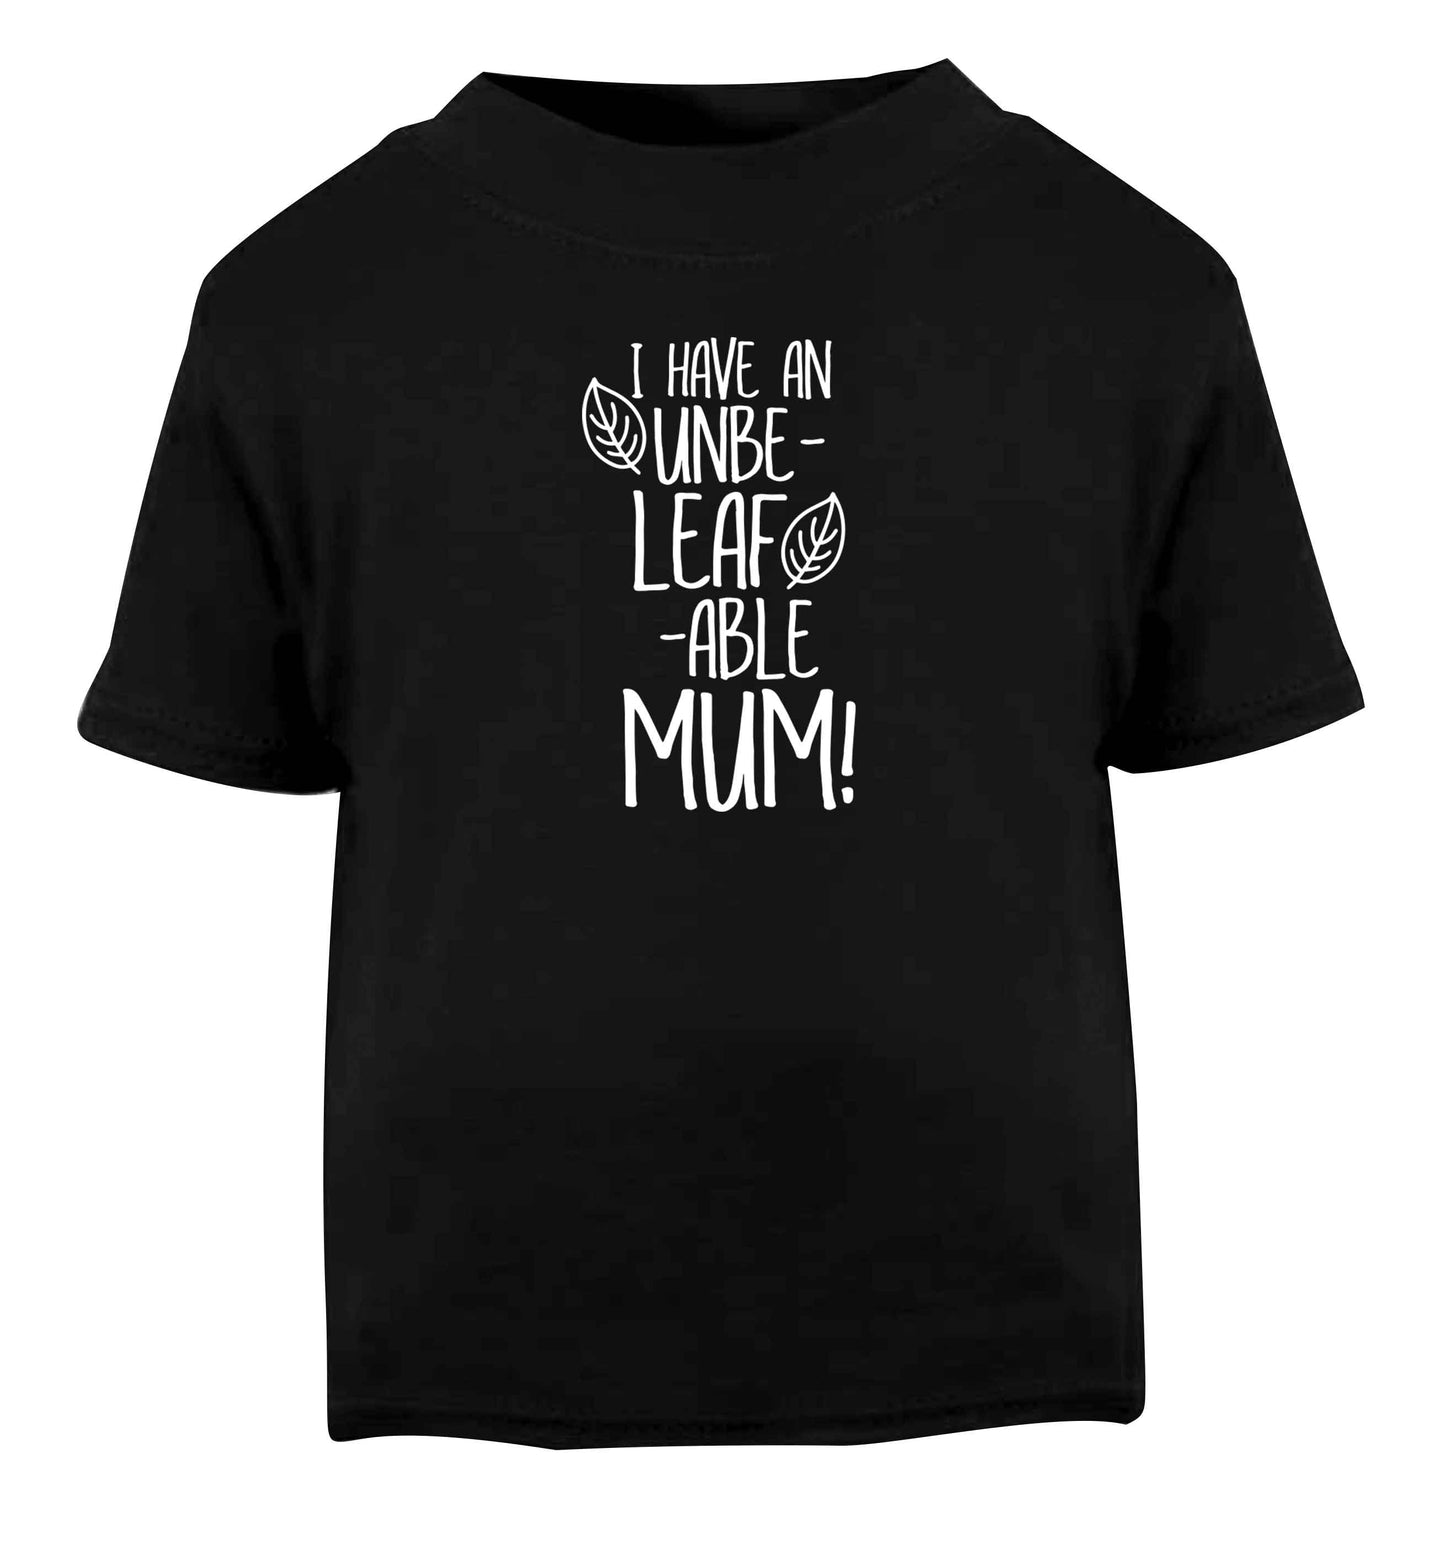 I have an unbeleafable mum! Black baby toddler Tshirt 2 years